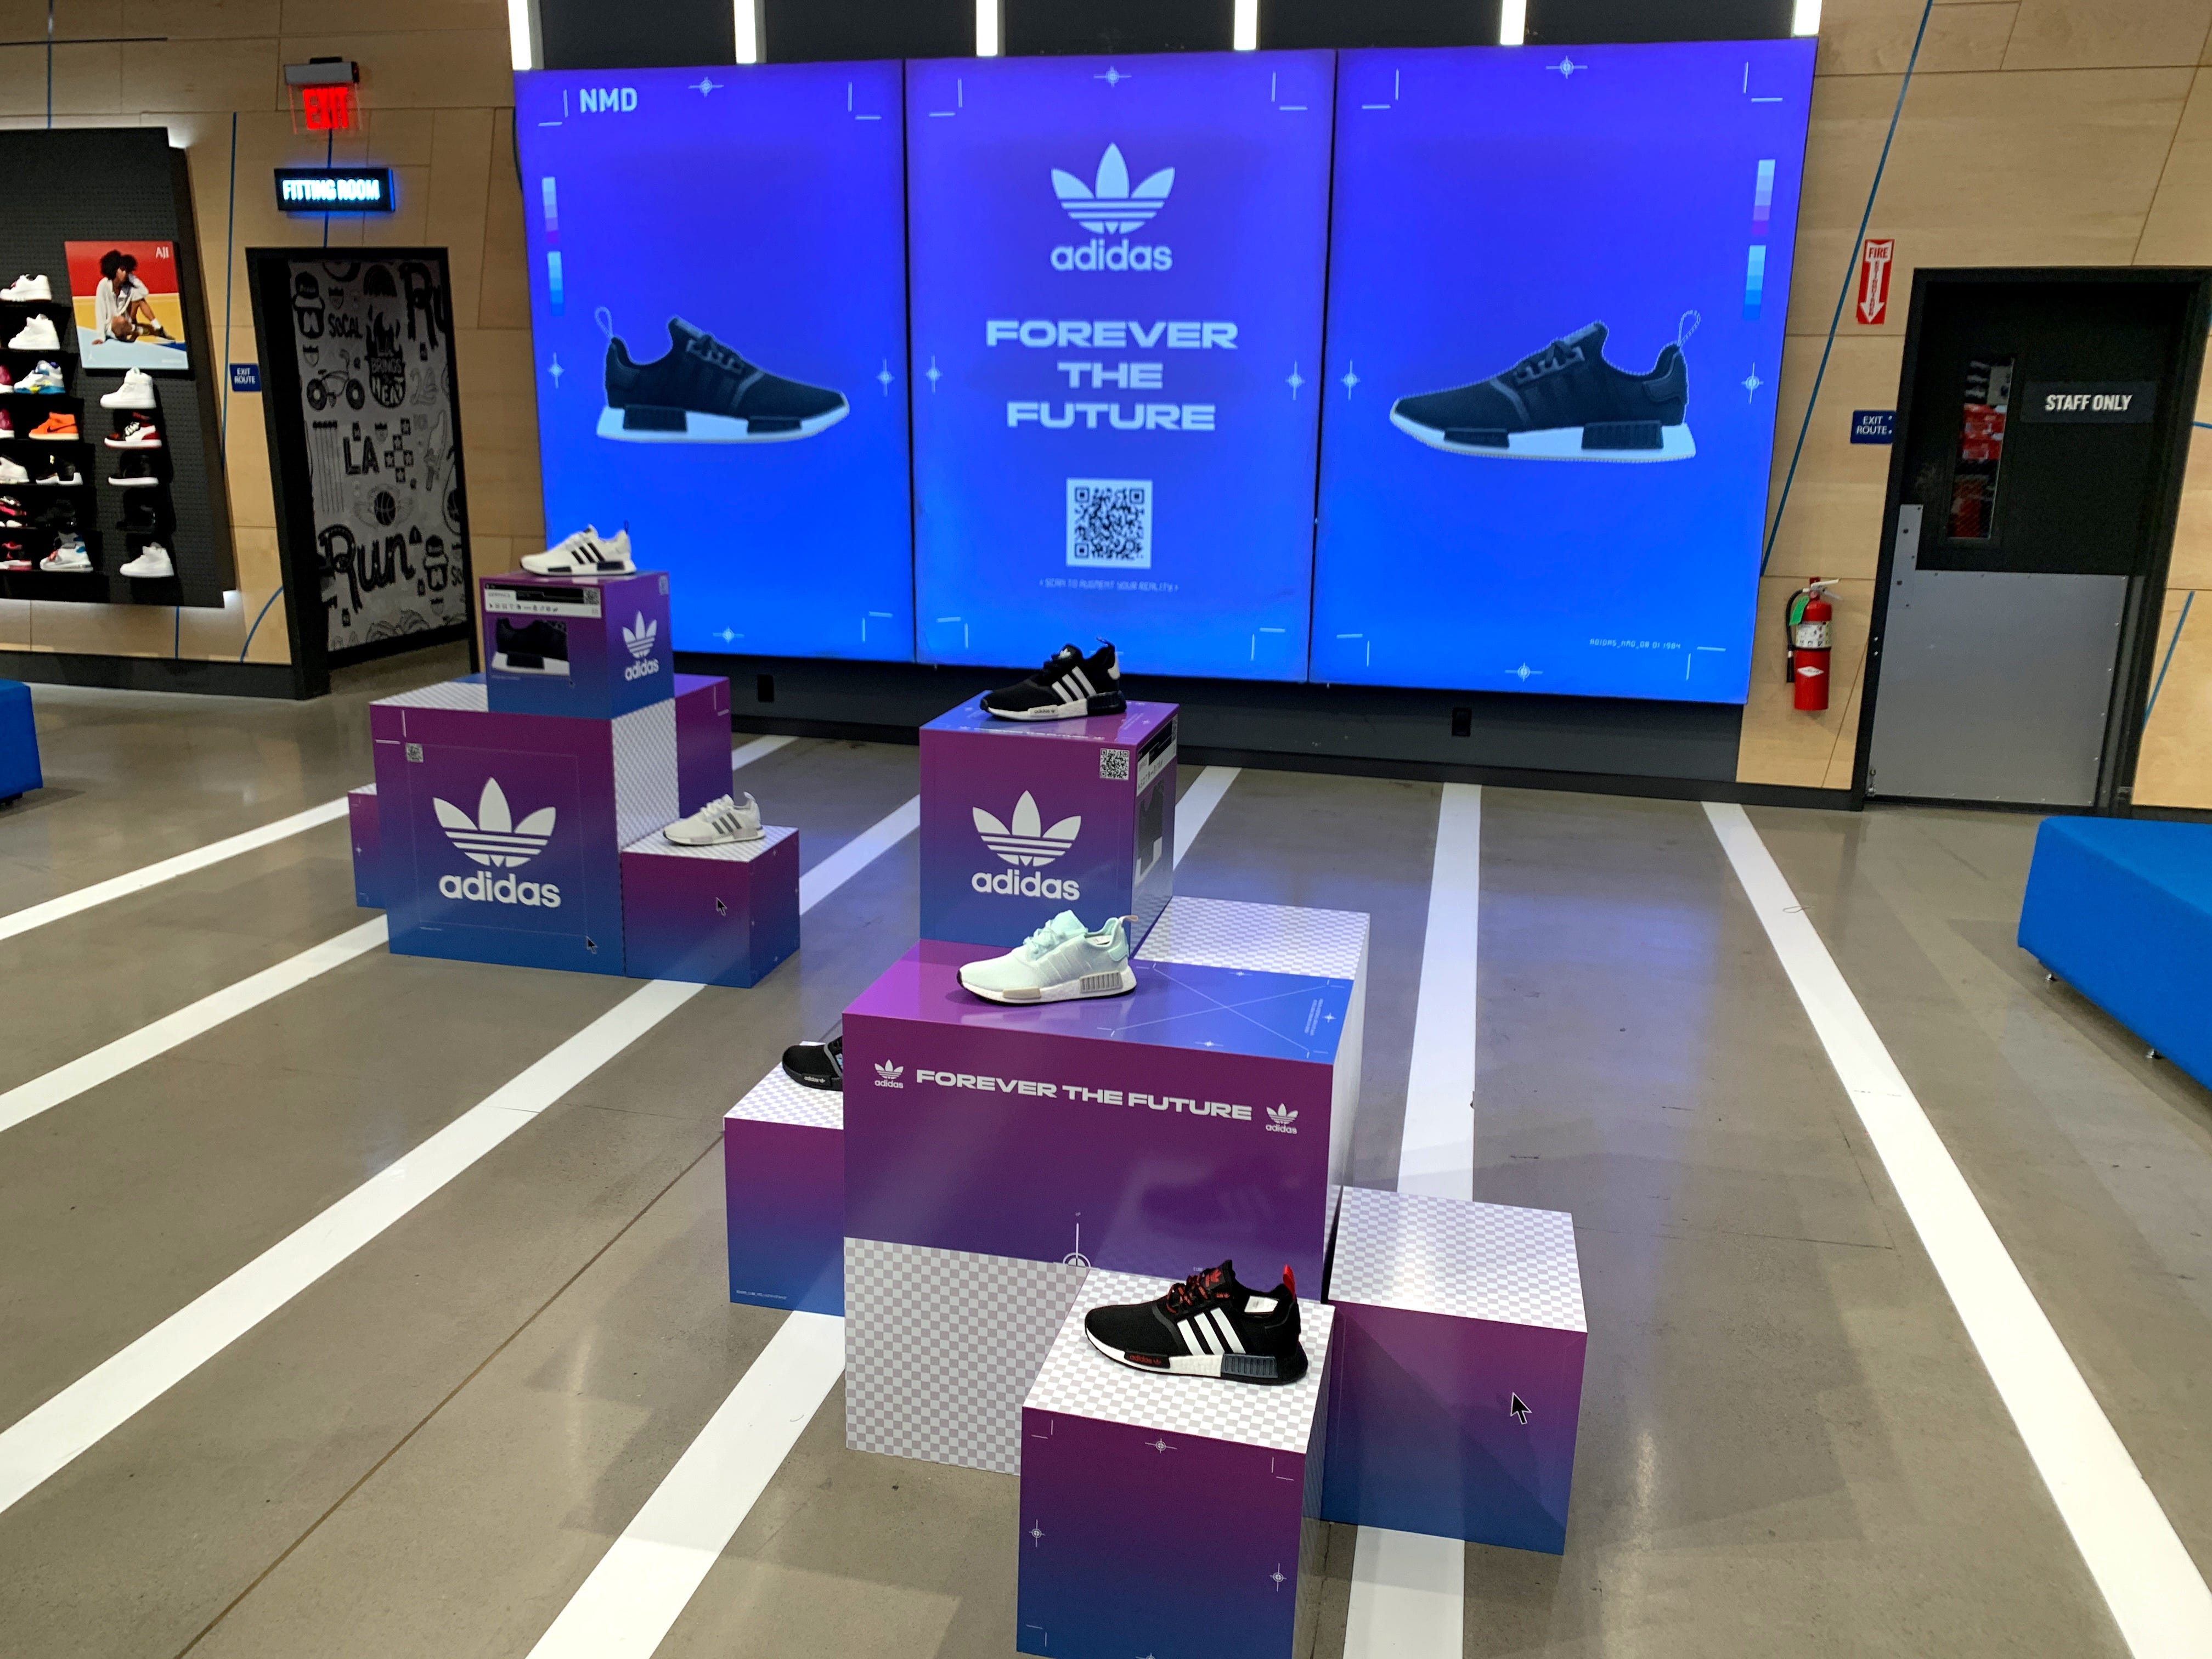 Adidas takes ARCommerce to Finish Line | 8th Wall